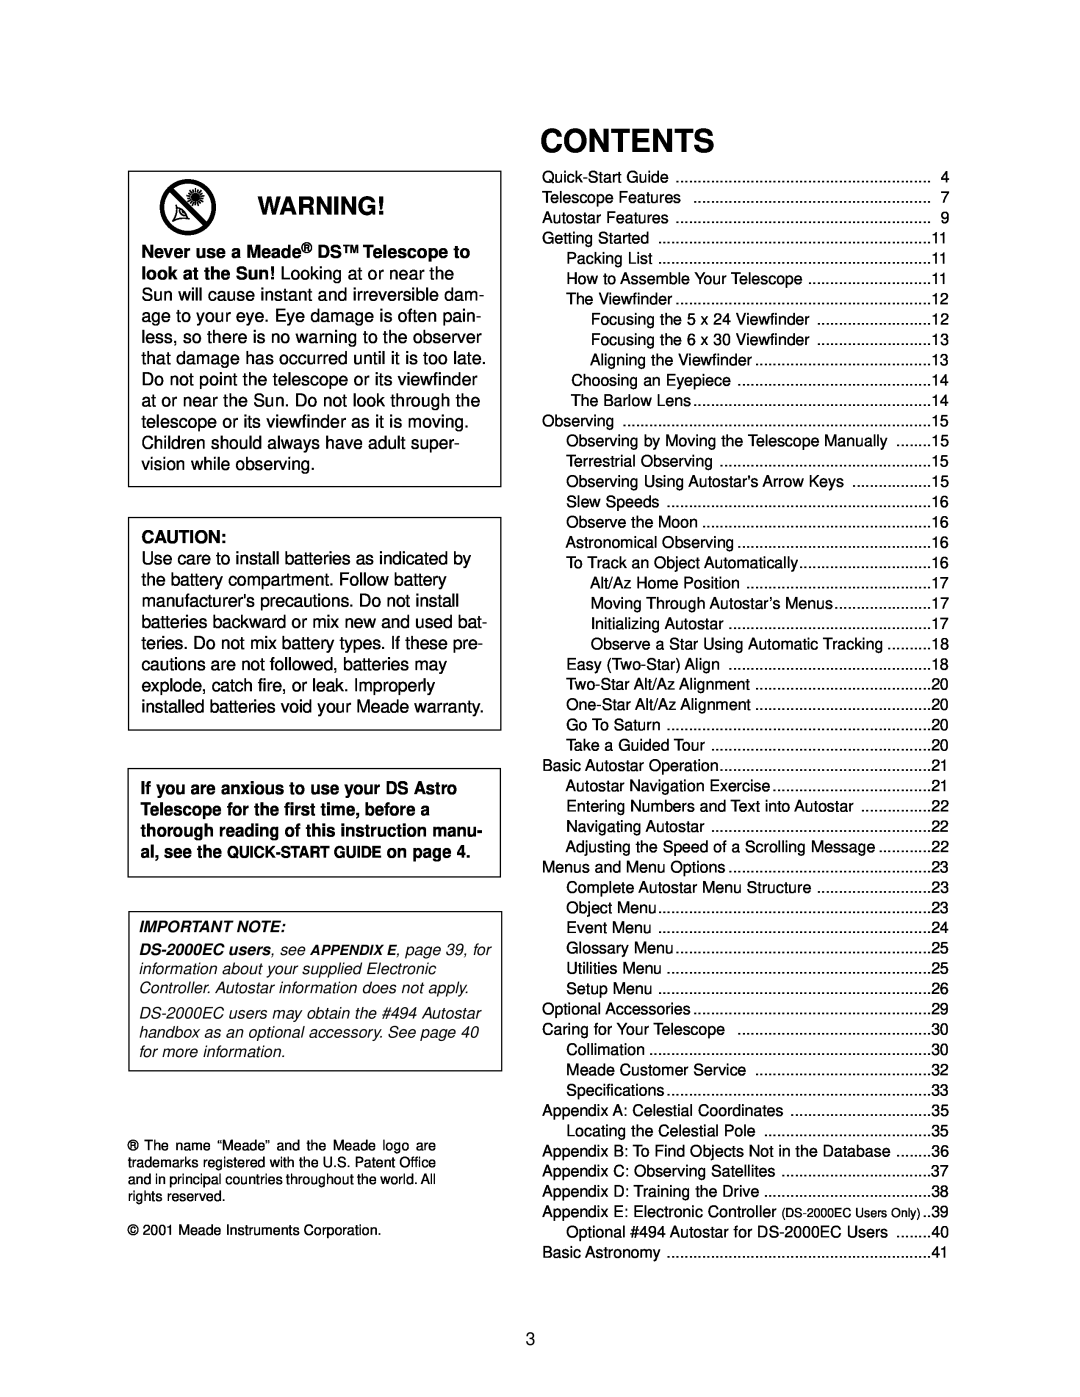 Meade DS-2000 instruction manual Contents, Important Note 